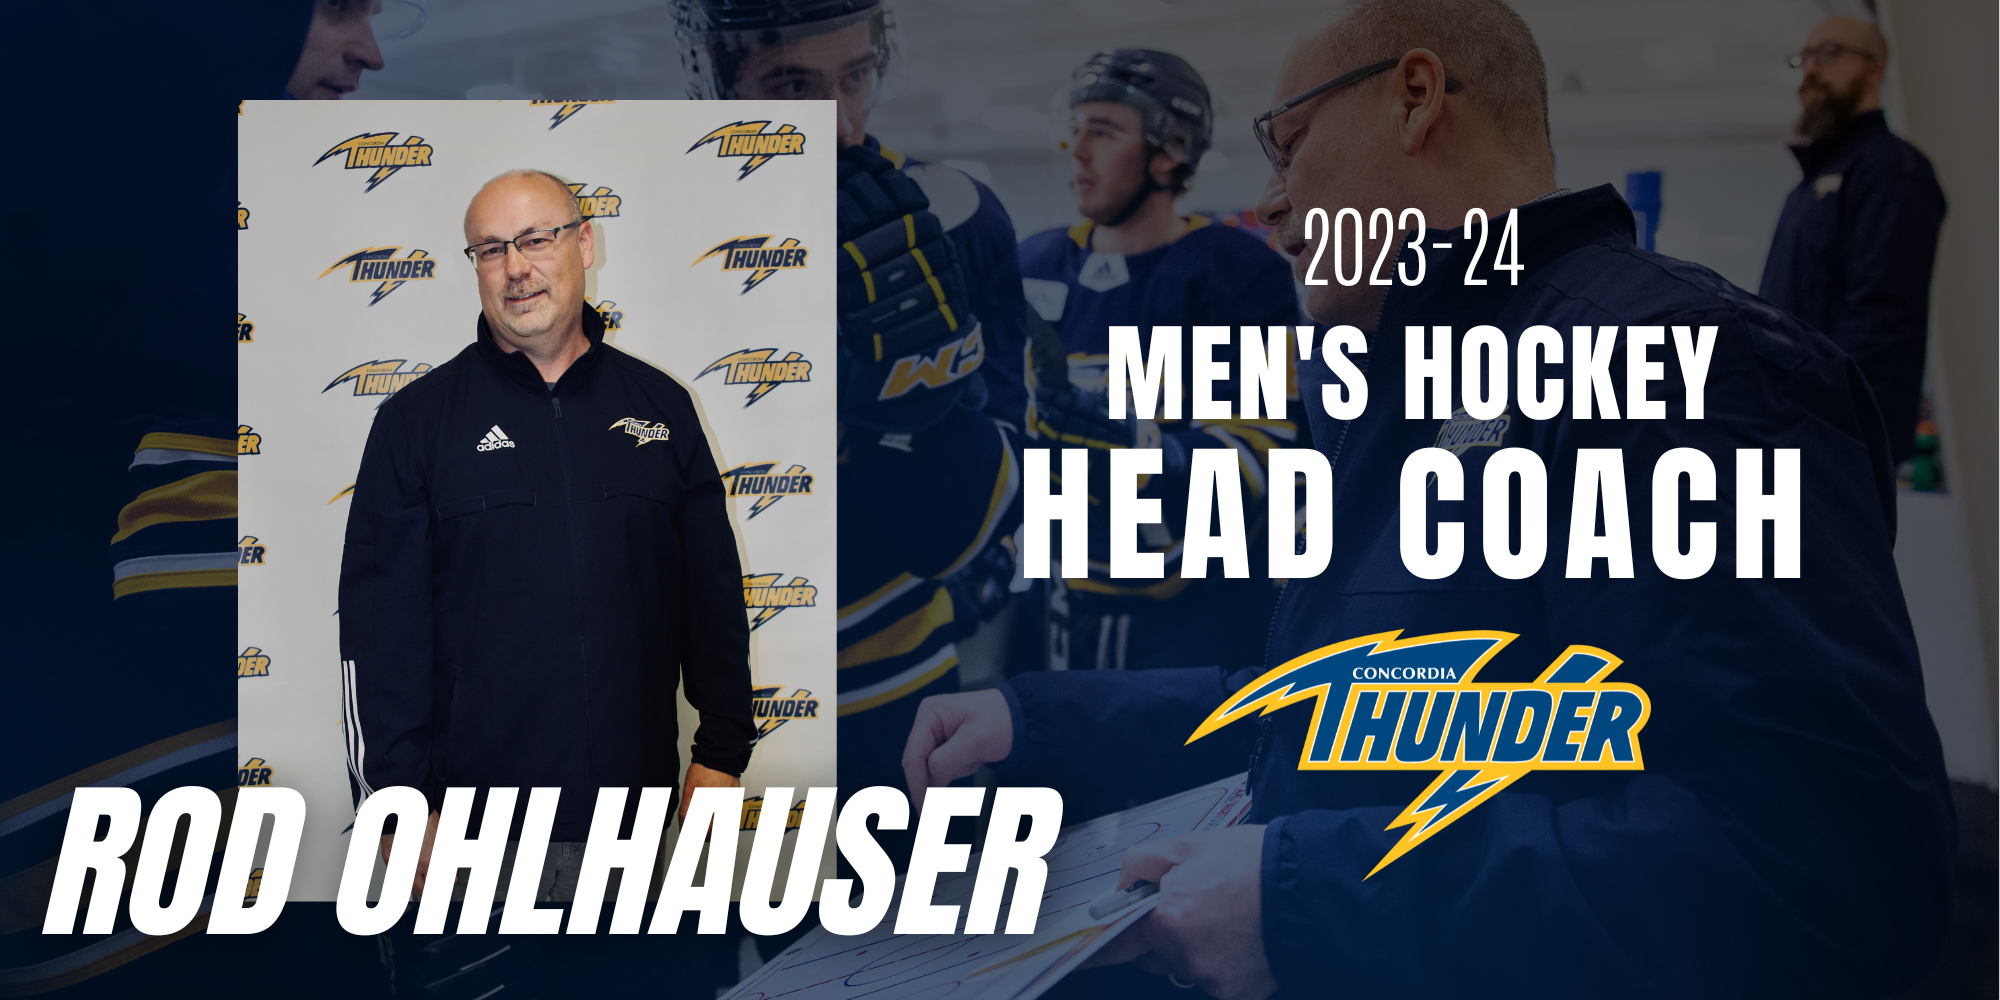 Interim Tag Removed, Ohlhauser Named Men's Hockey Head Coach